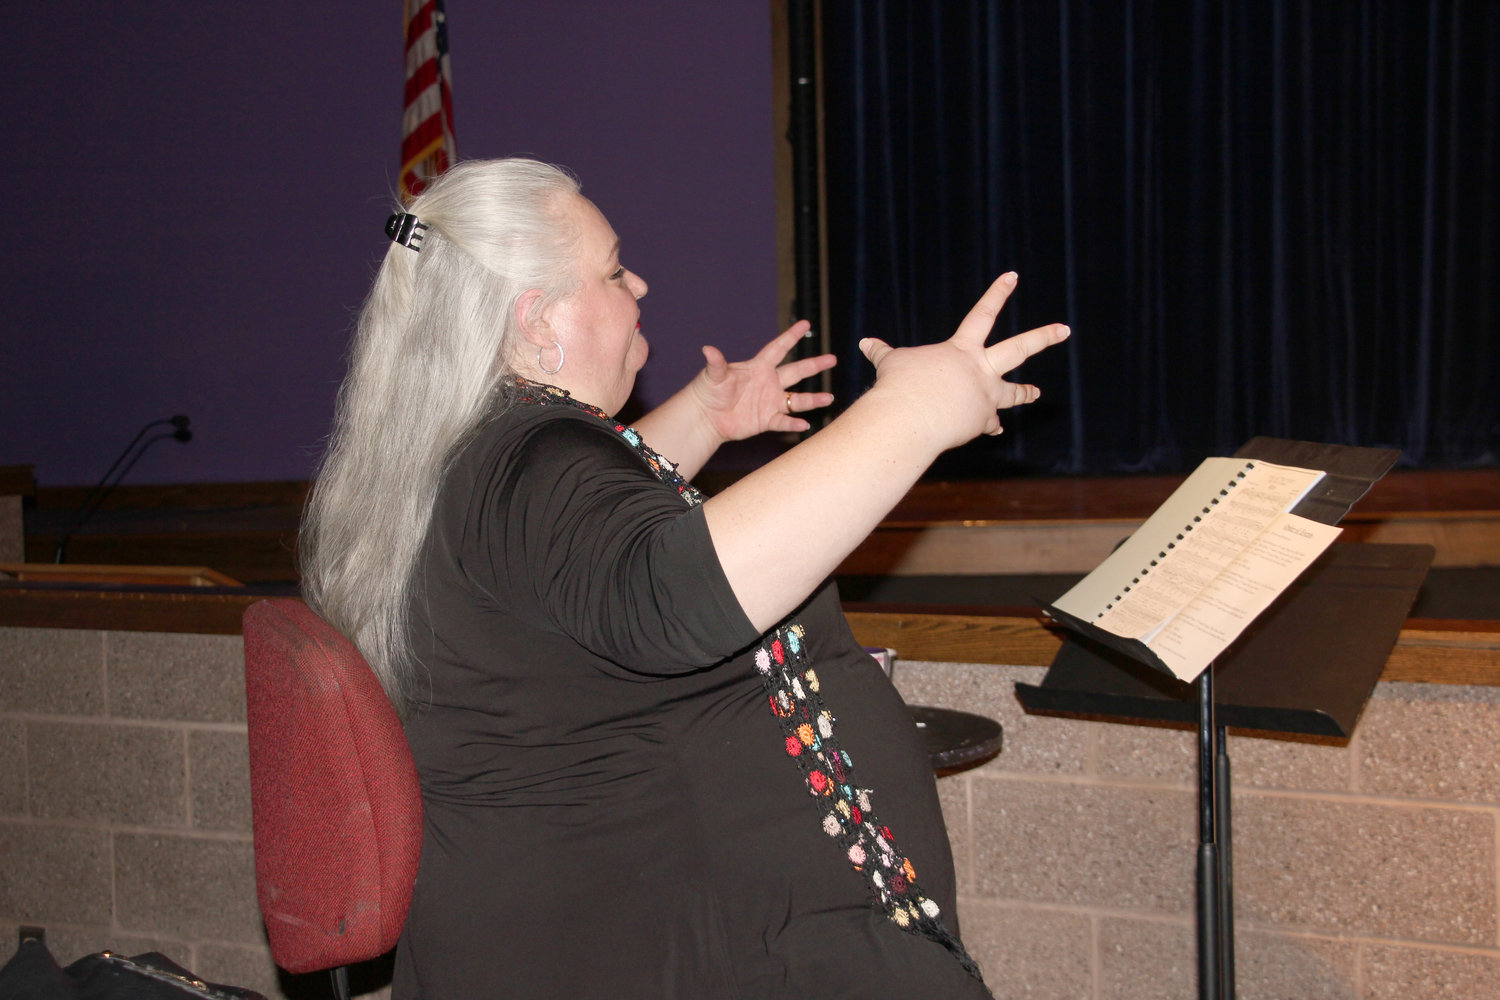 World renowned mezzo soprano Stephanie Blythe offers recommendations following
a student’s presentation.